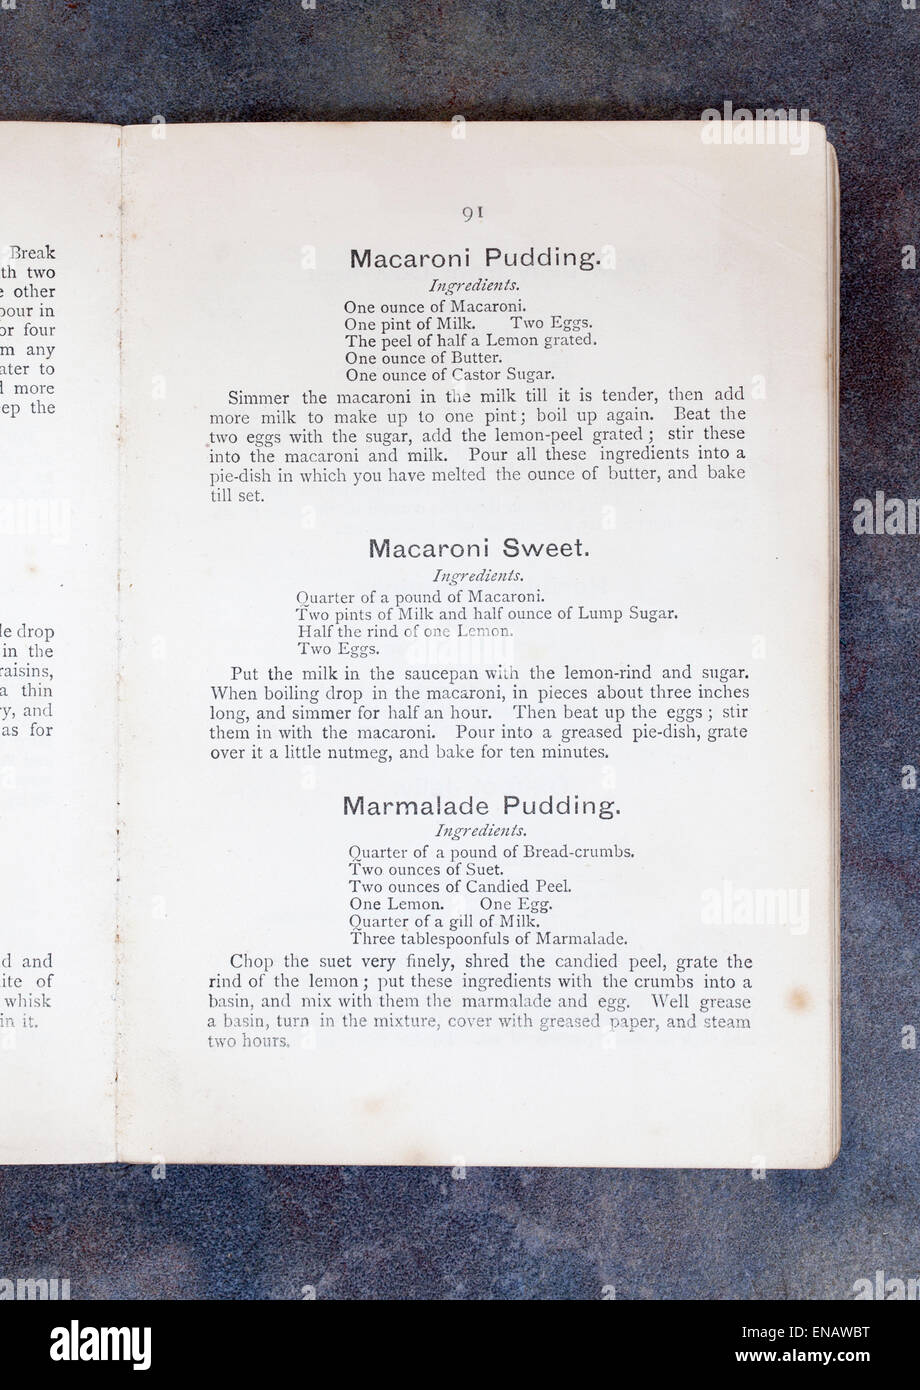 Macaroni Pudding Sweet Marmalade Pudding Recipes from Vintage Cookery Book Stock Photo